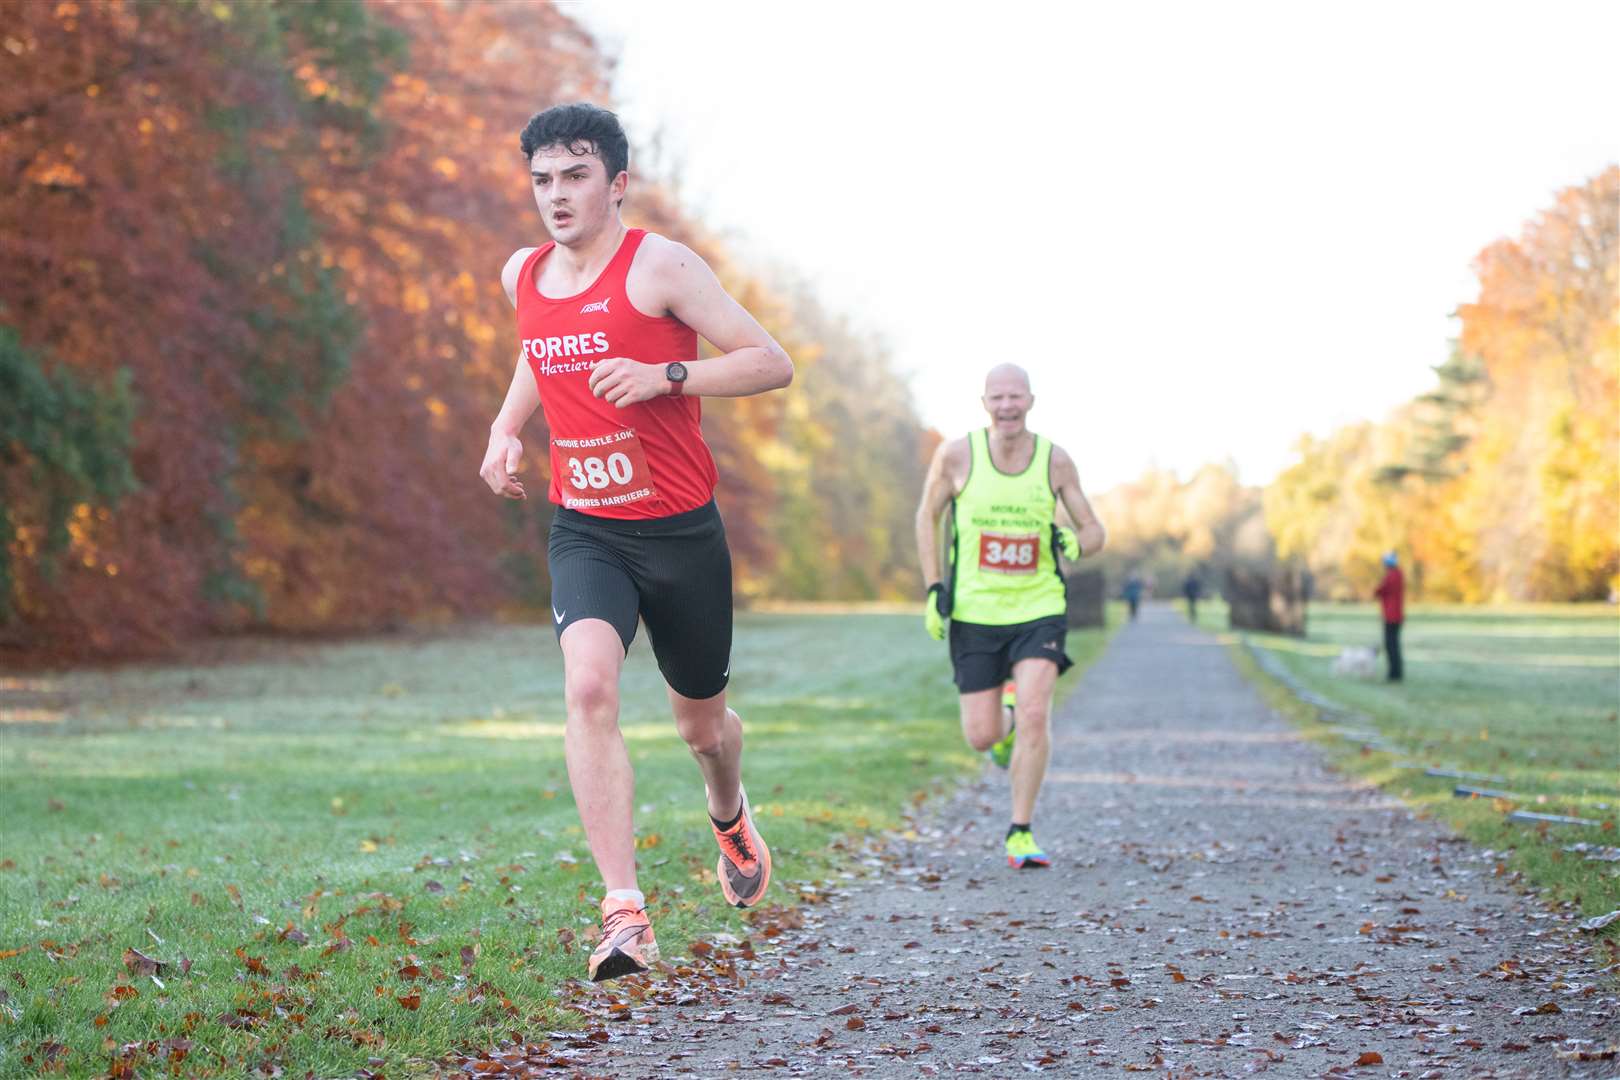 Bruce Evans was the first Forres Harrier runner home in 6th place, finishing with a time of 34:30. ..Forres Harriers' organised Brodie Castle 10k Race 2023...Picture: Daniel Forsyth..